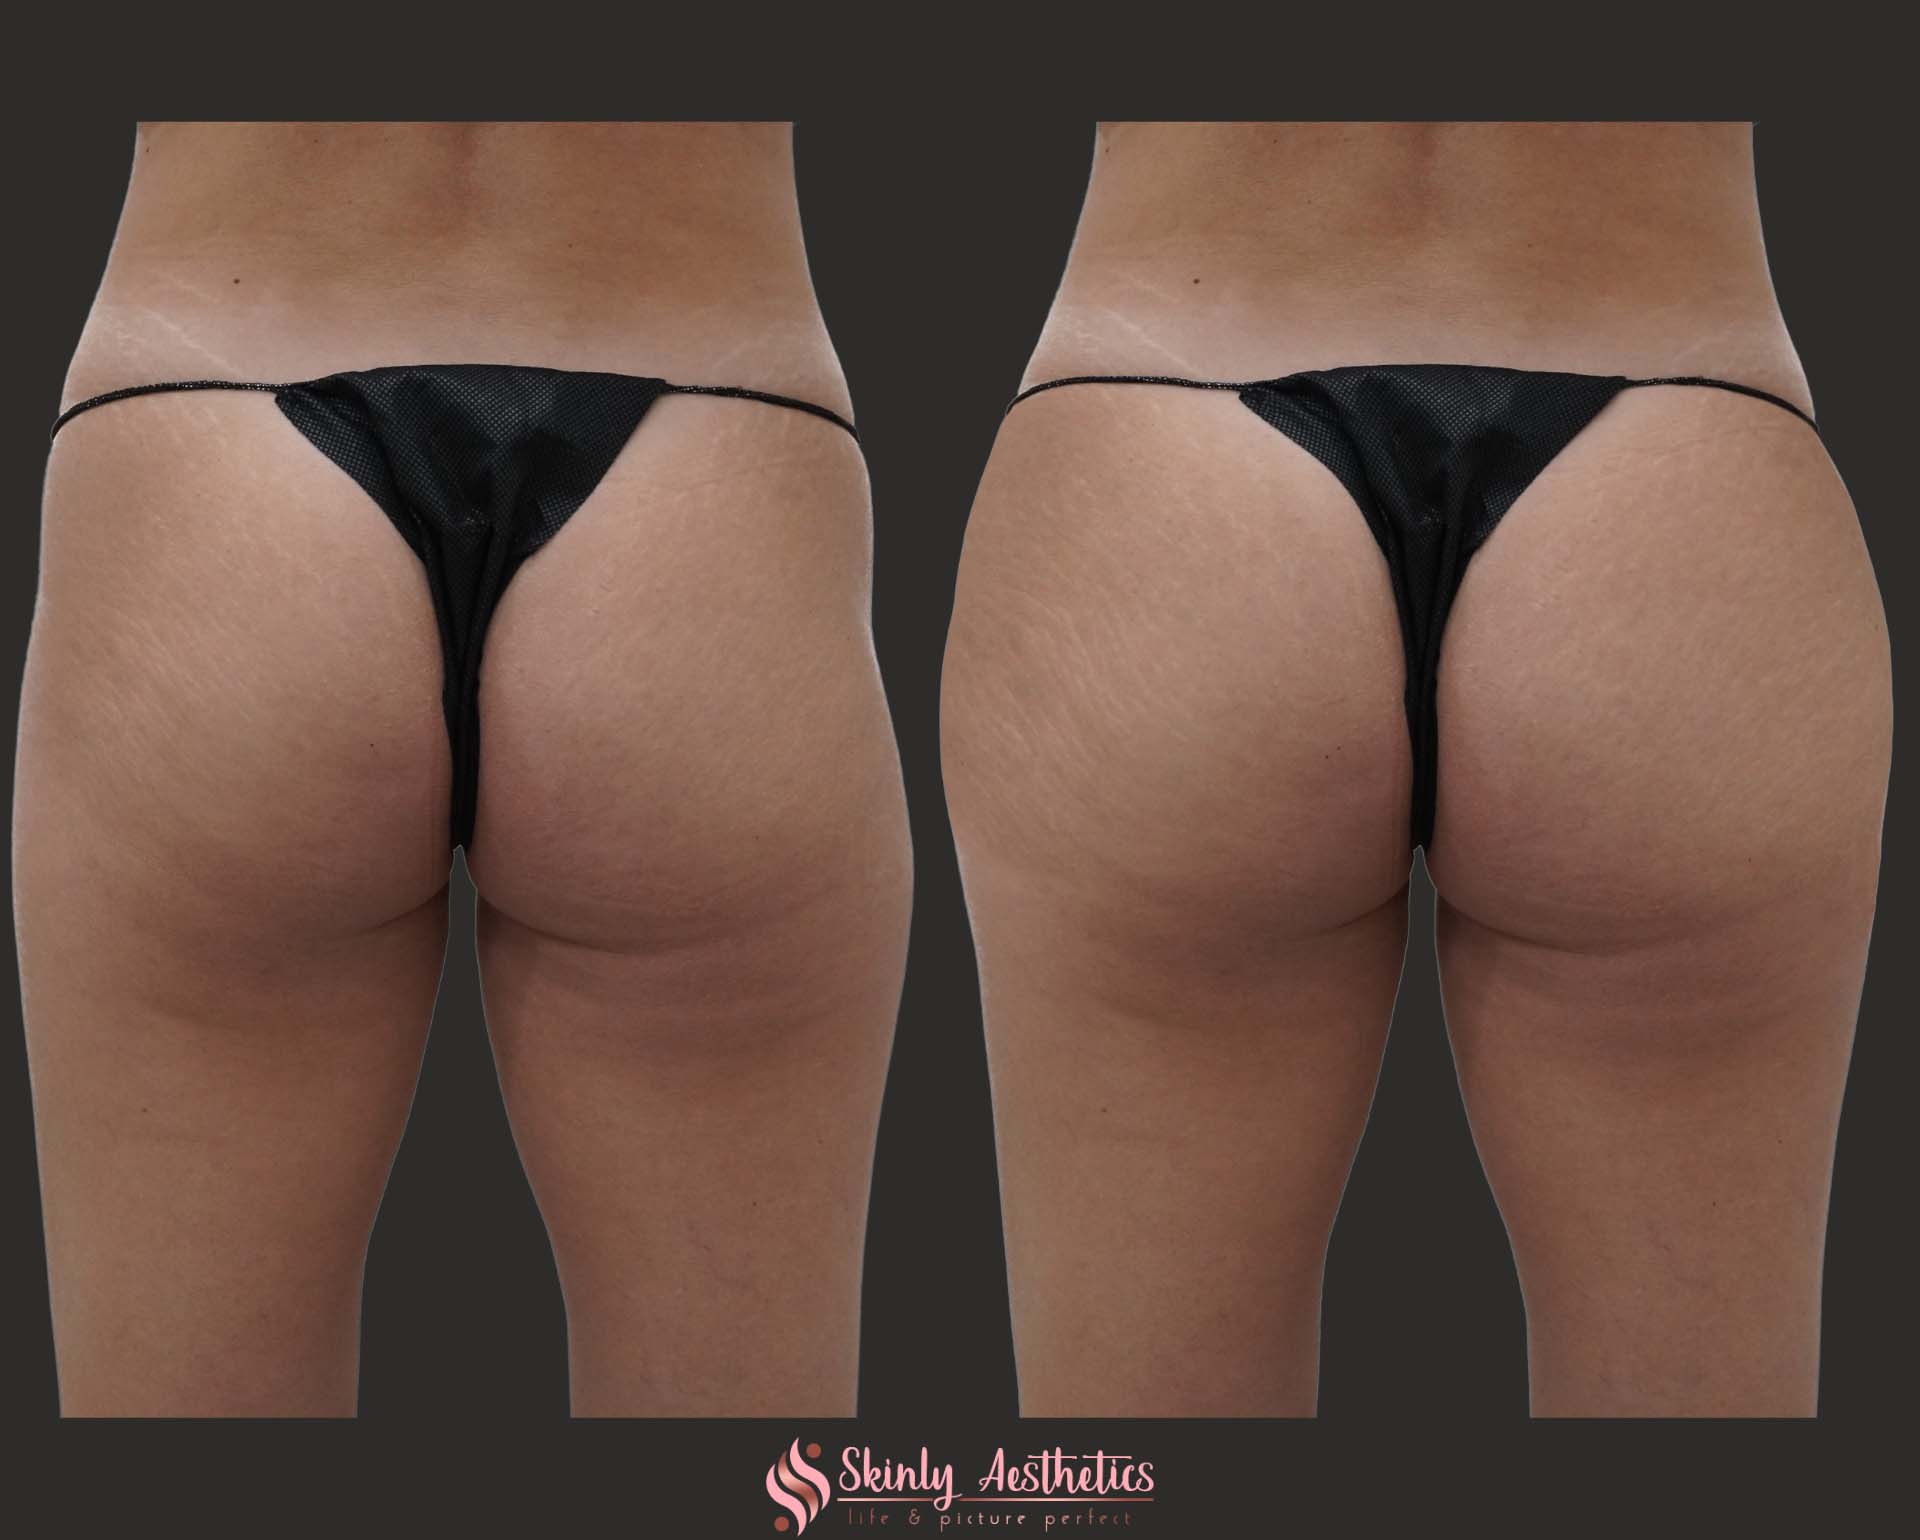 Sculptra treatment results following the filling of hip dips with fillers